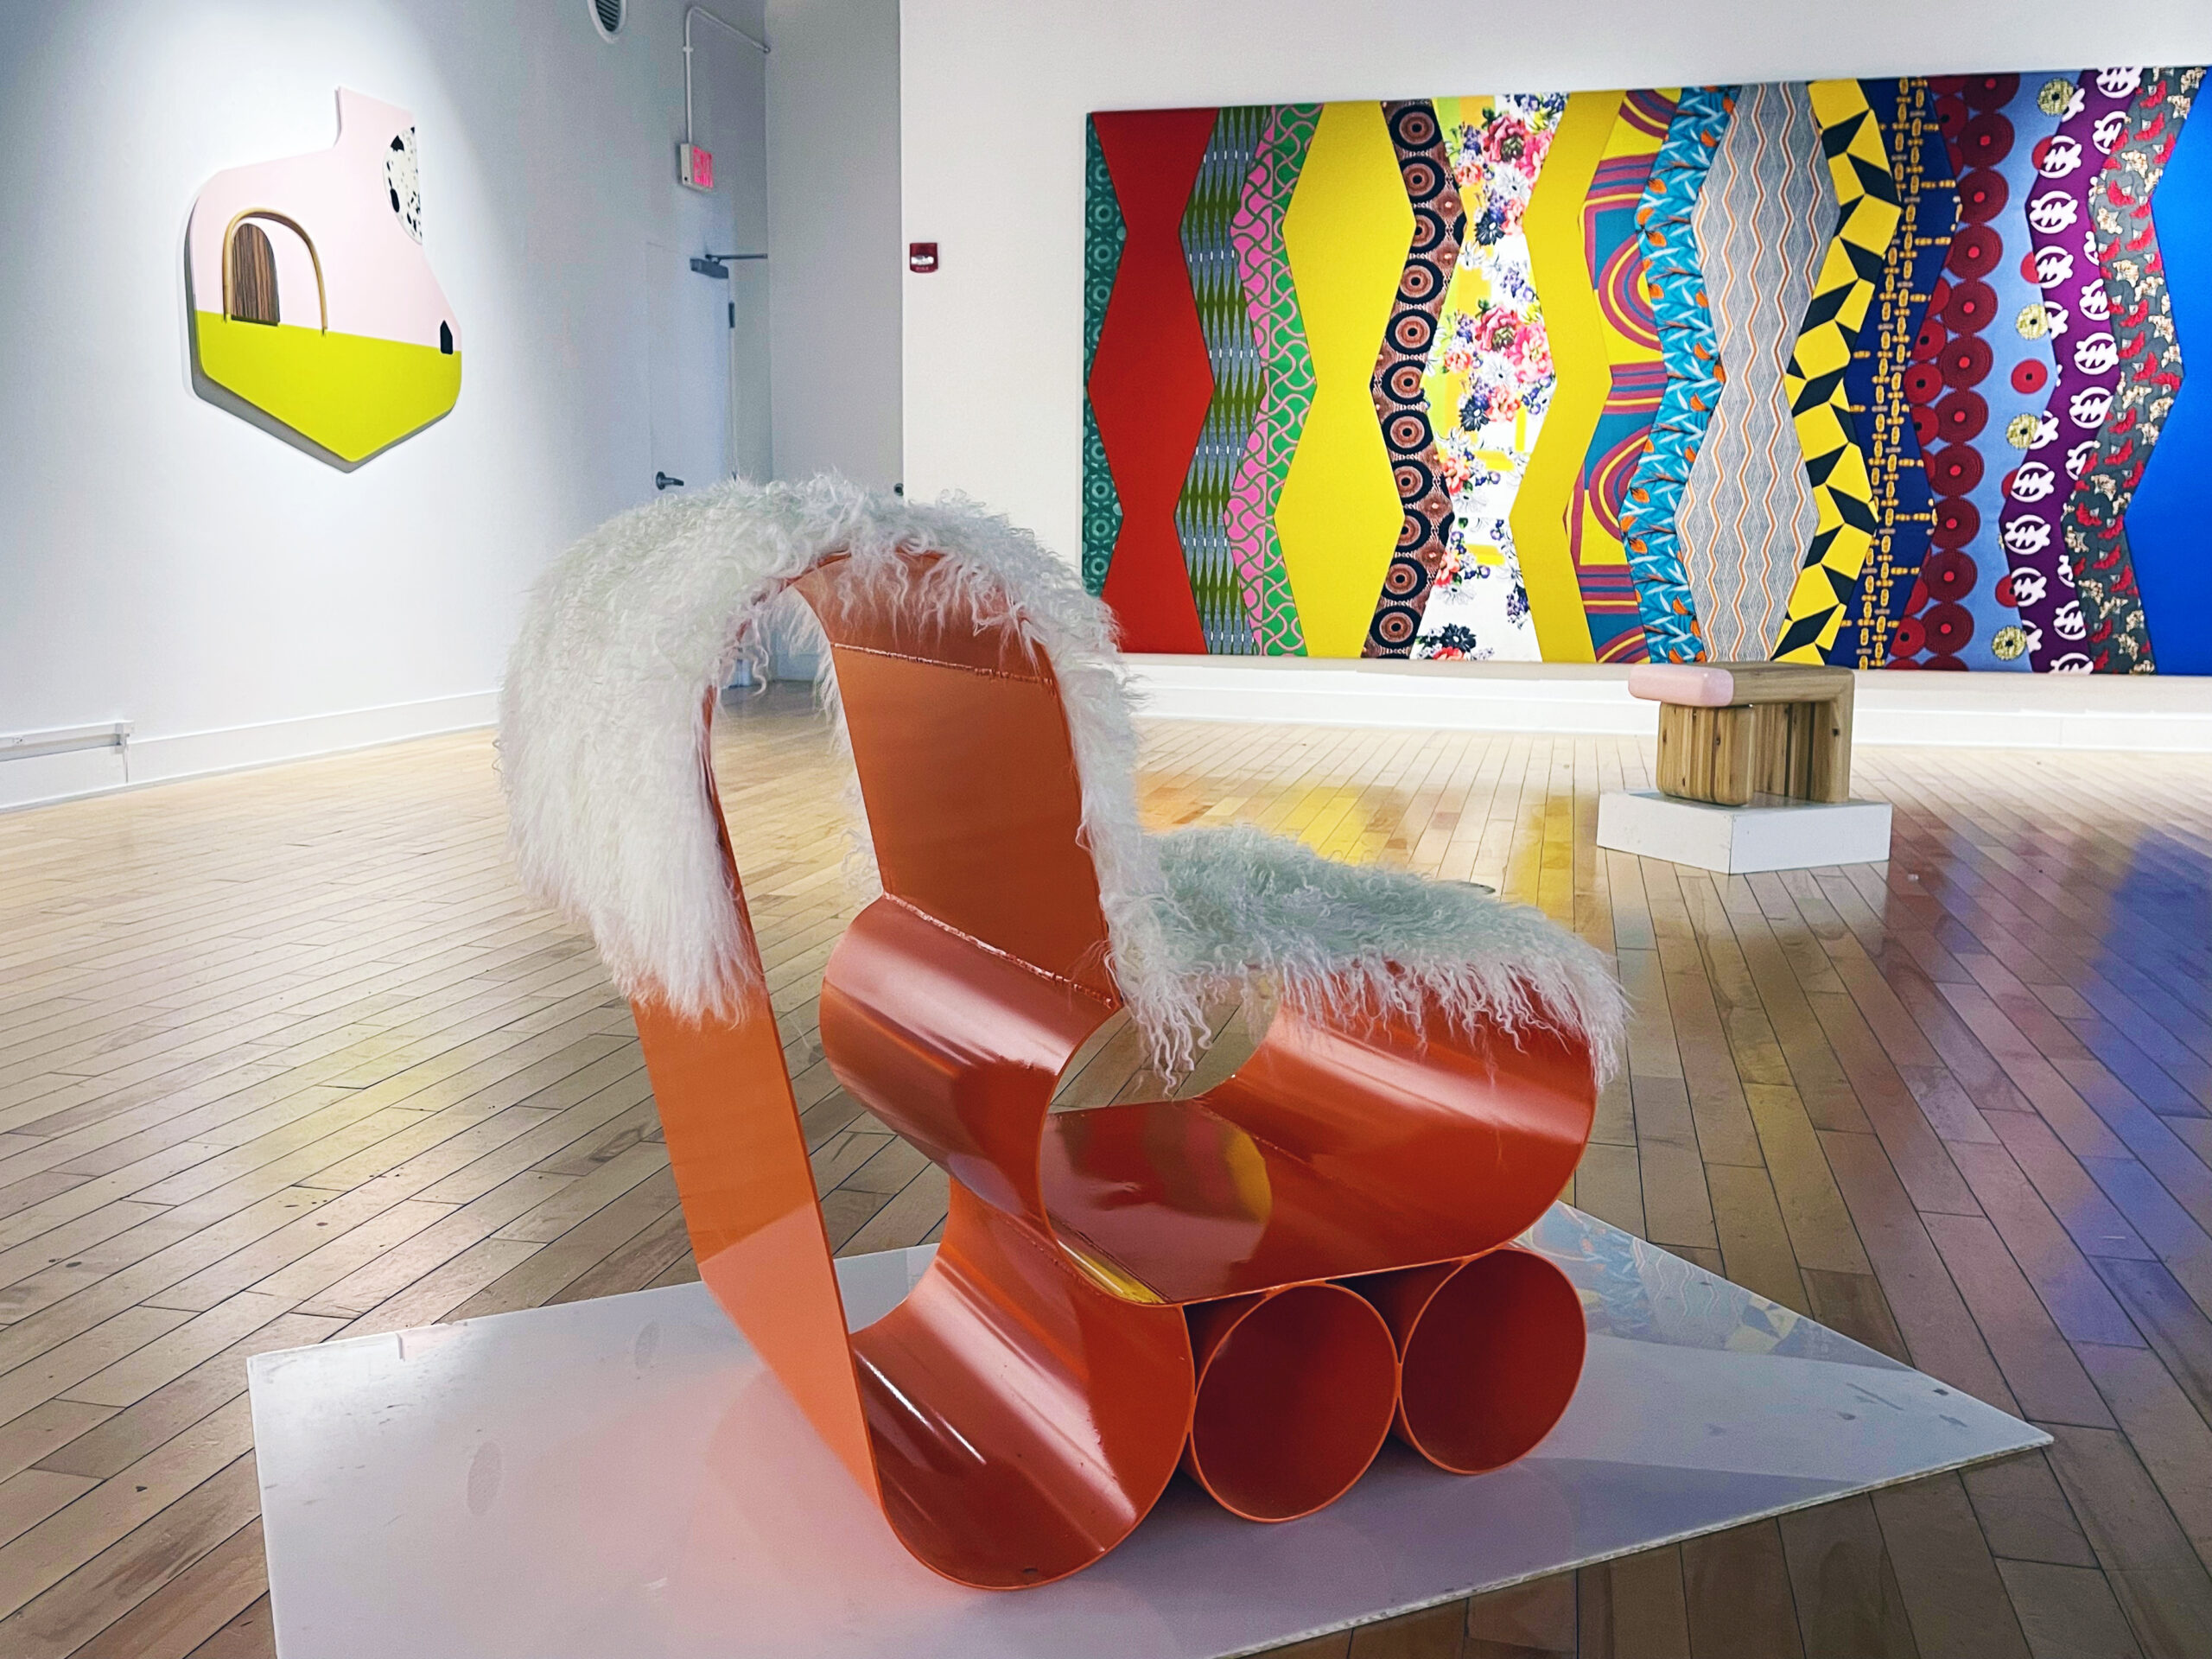 A gallery installation featuring an orange curved metal chair with a white fur covering in the foreground and a brightly colored abstract painting in the background.